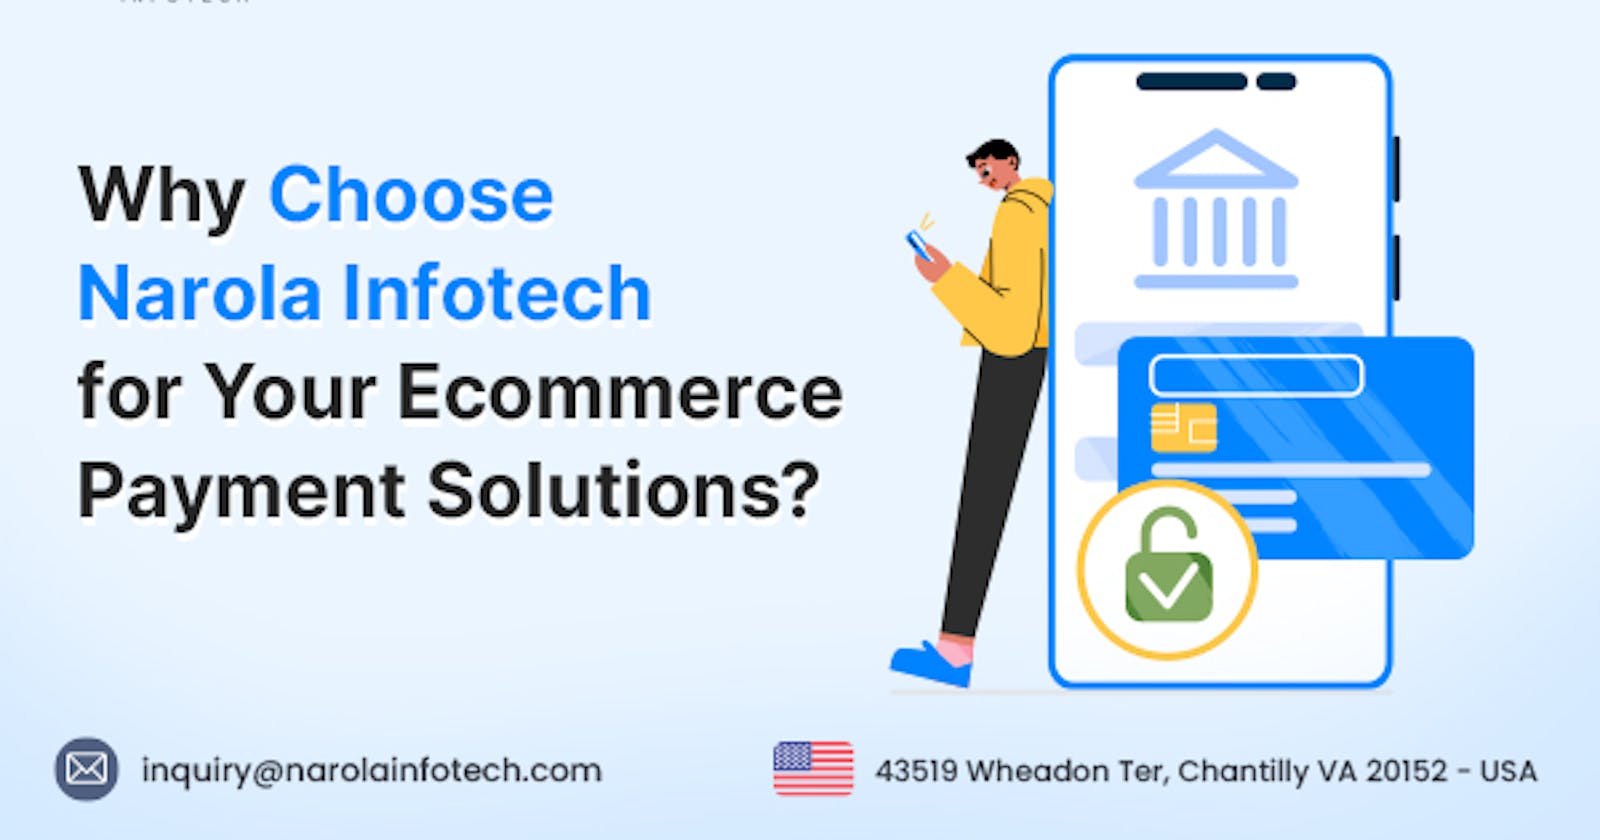 Why Choose Narola Infotech for Your Ecommerce Payment Solutions?